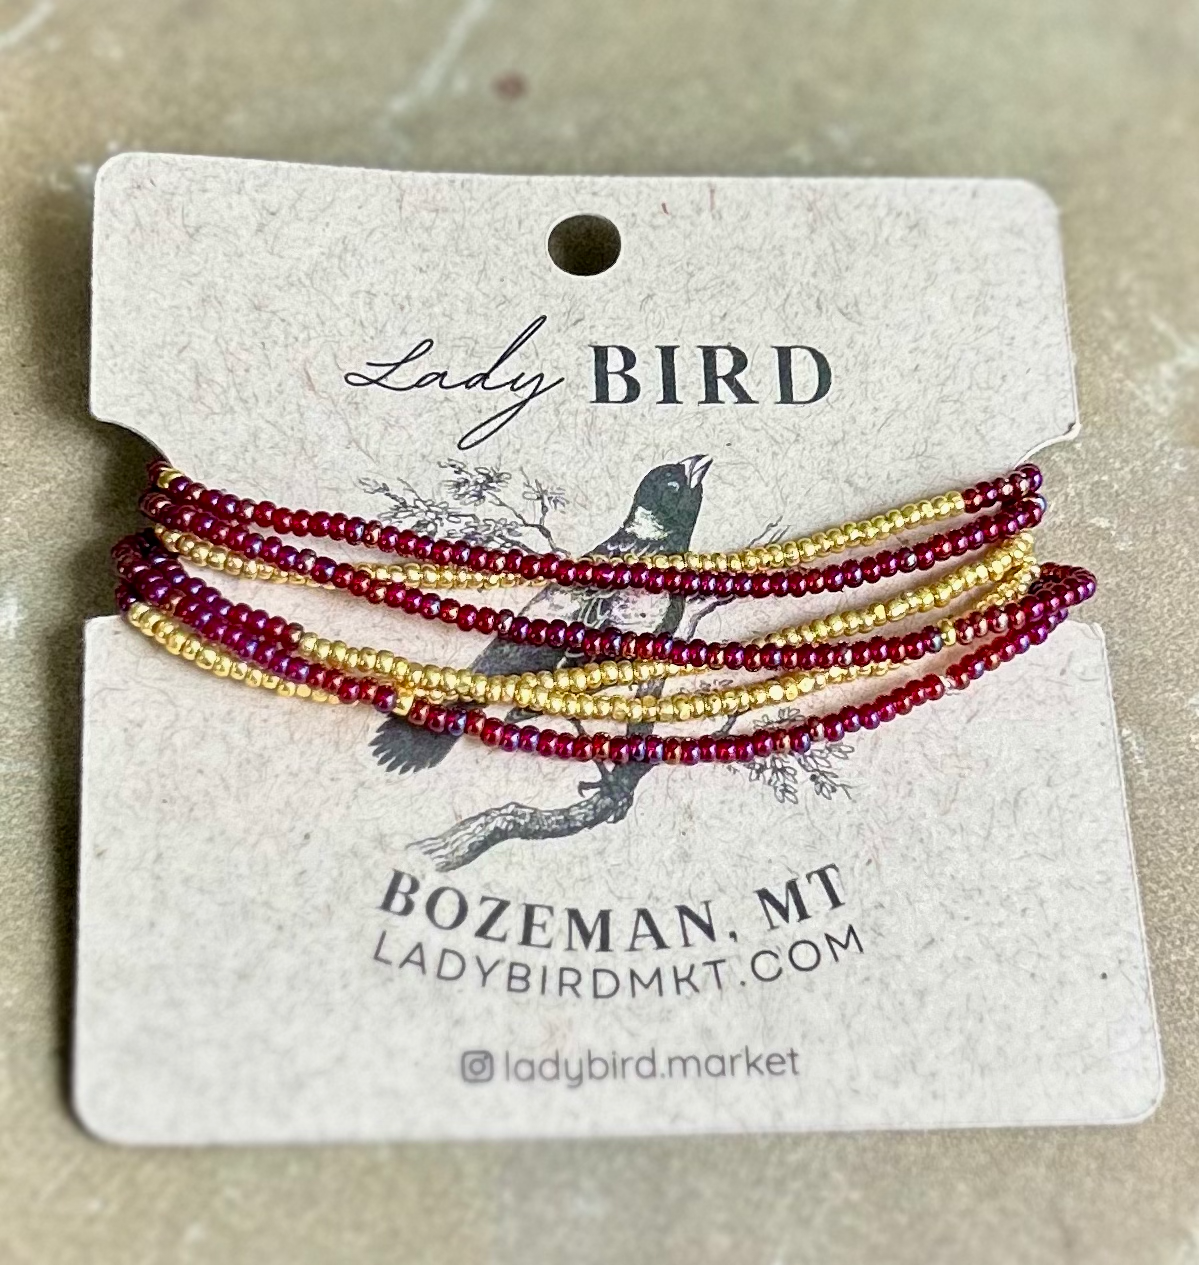 Shimmery Red & Gold Lined Combo Beaded 5-Wrap Bracelet